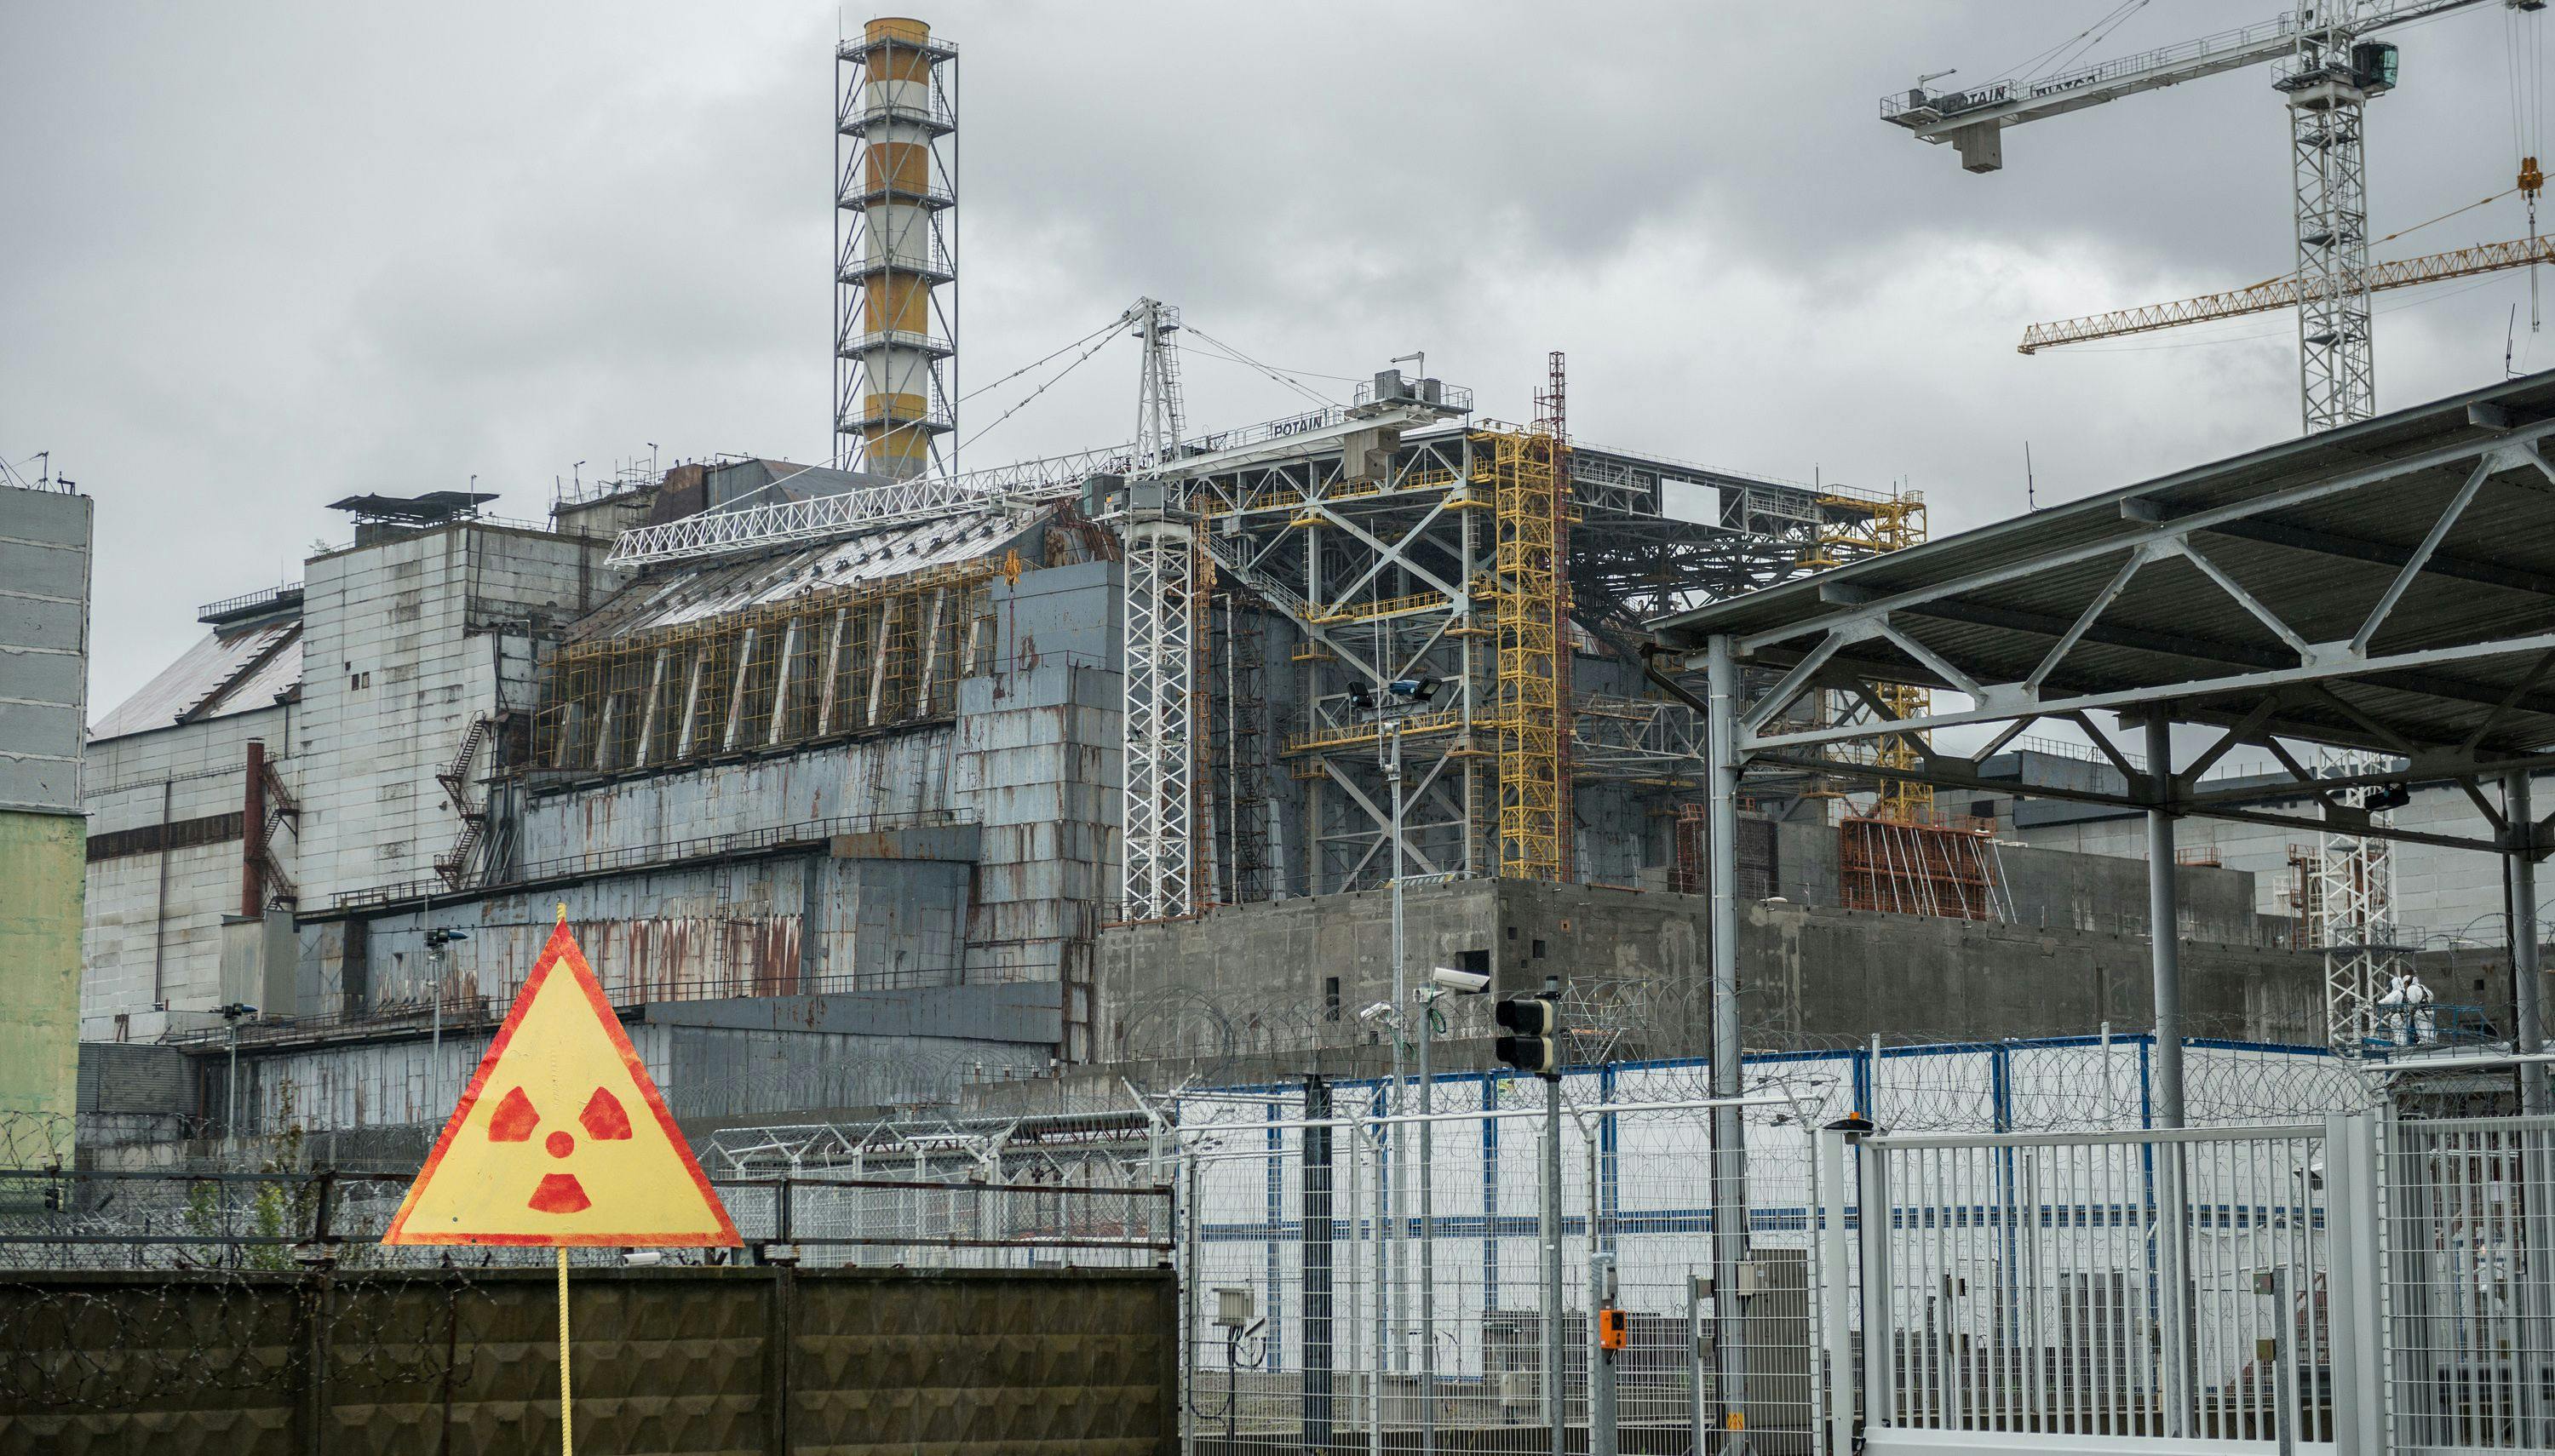 Chernobyl Disaster May Be Linked With Rare Cancer 30 Years Later